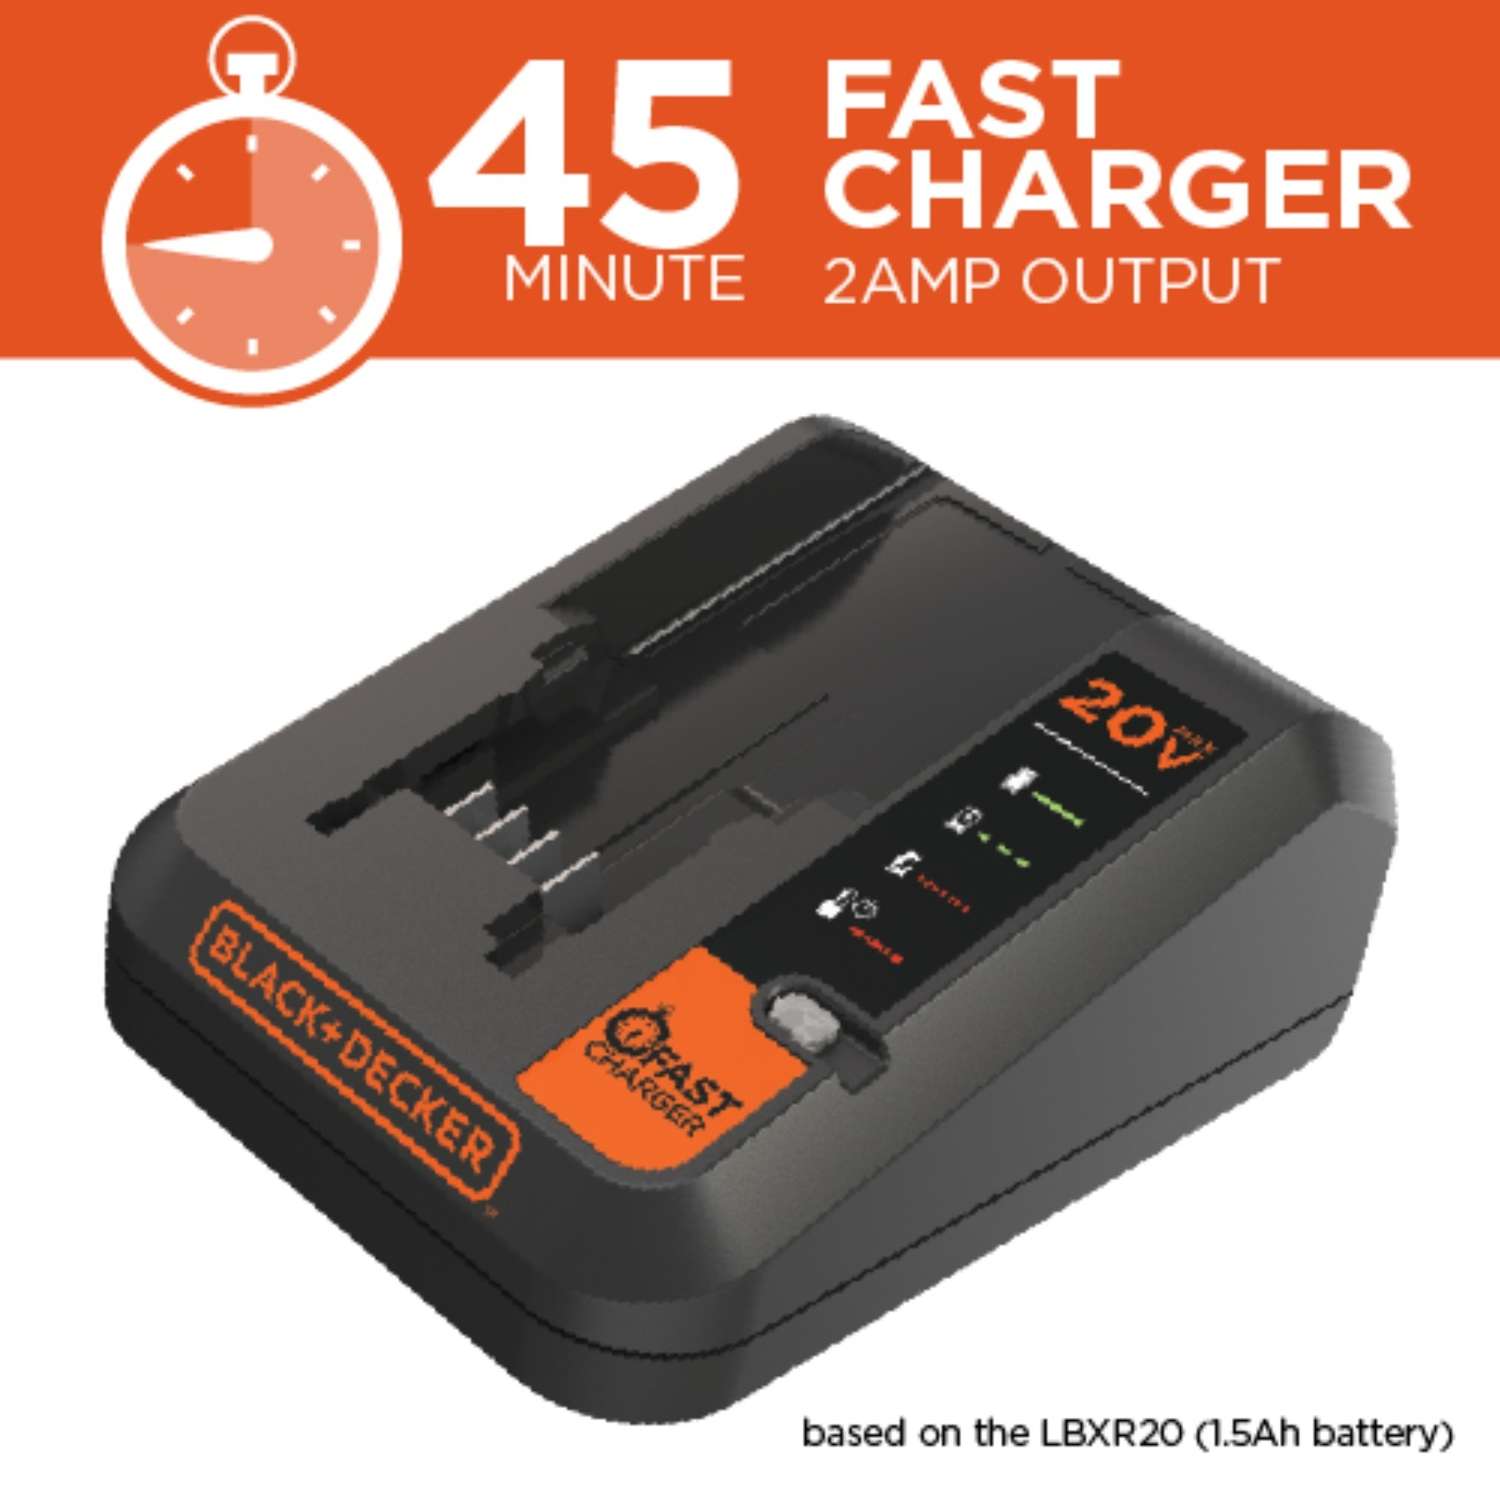 Black+Decker 20 V Lithium-Ion Battery Charger 1 pc - Ace Hardware